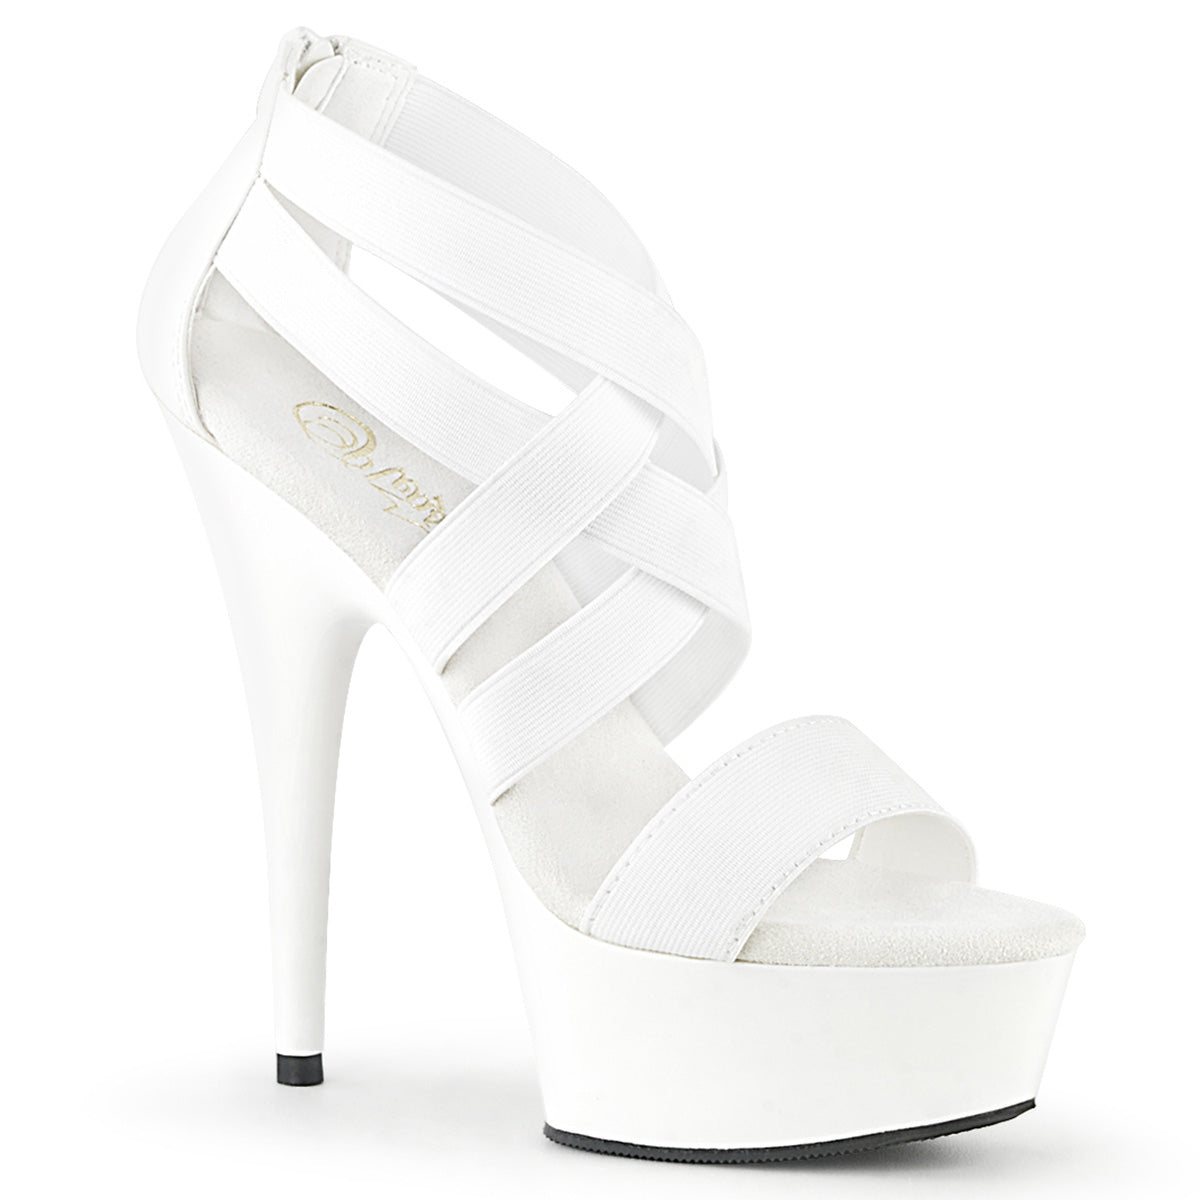 DELIGHT-669 Pleaser 6 Inch Heel White Pole Dancing Platforms-Pleaser- Sexy Shoes